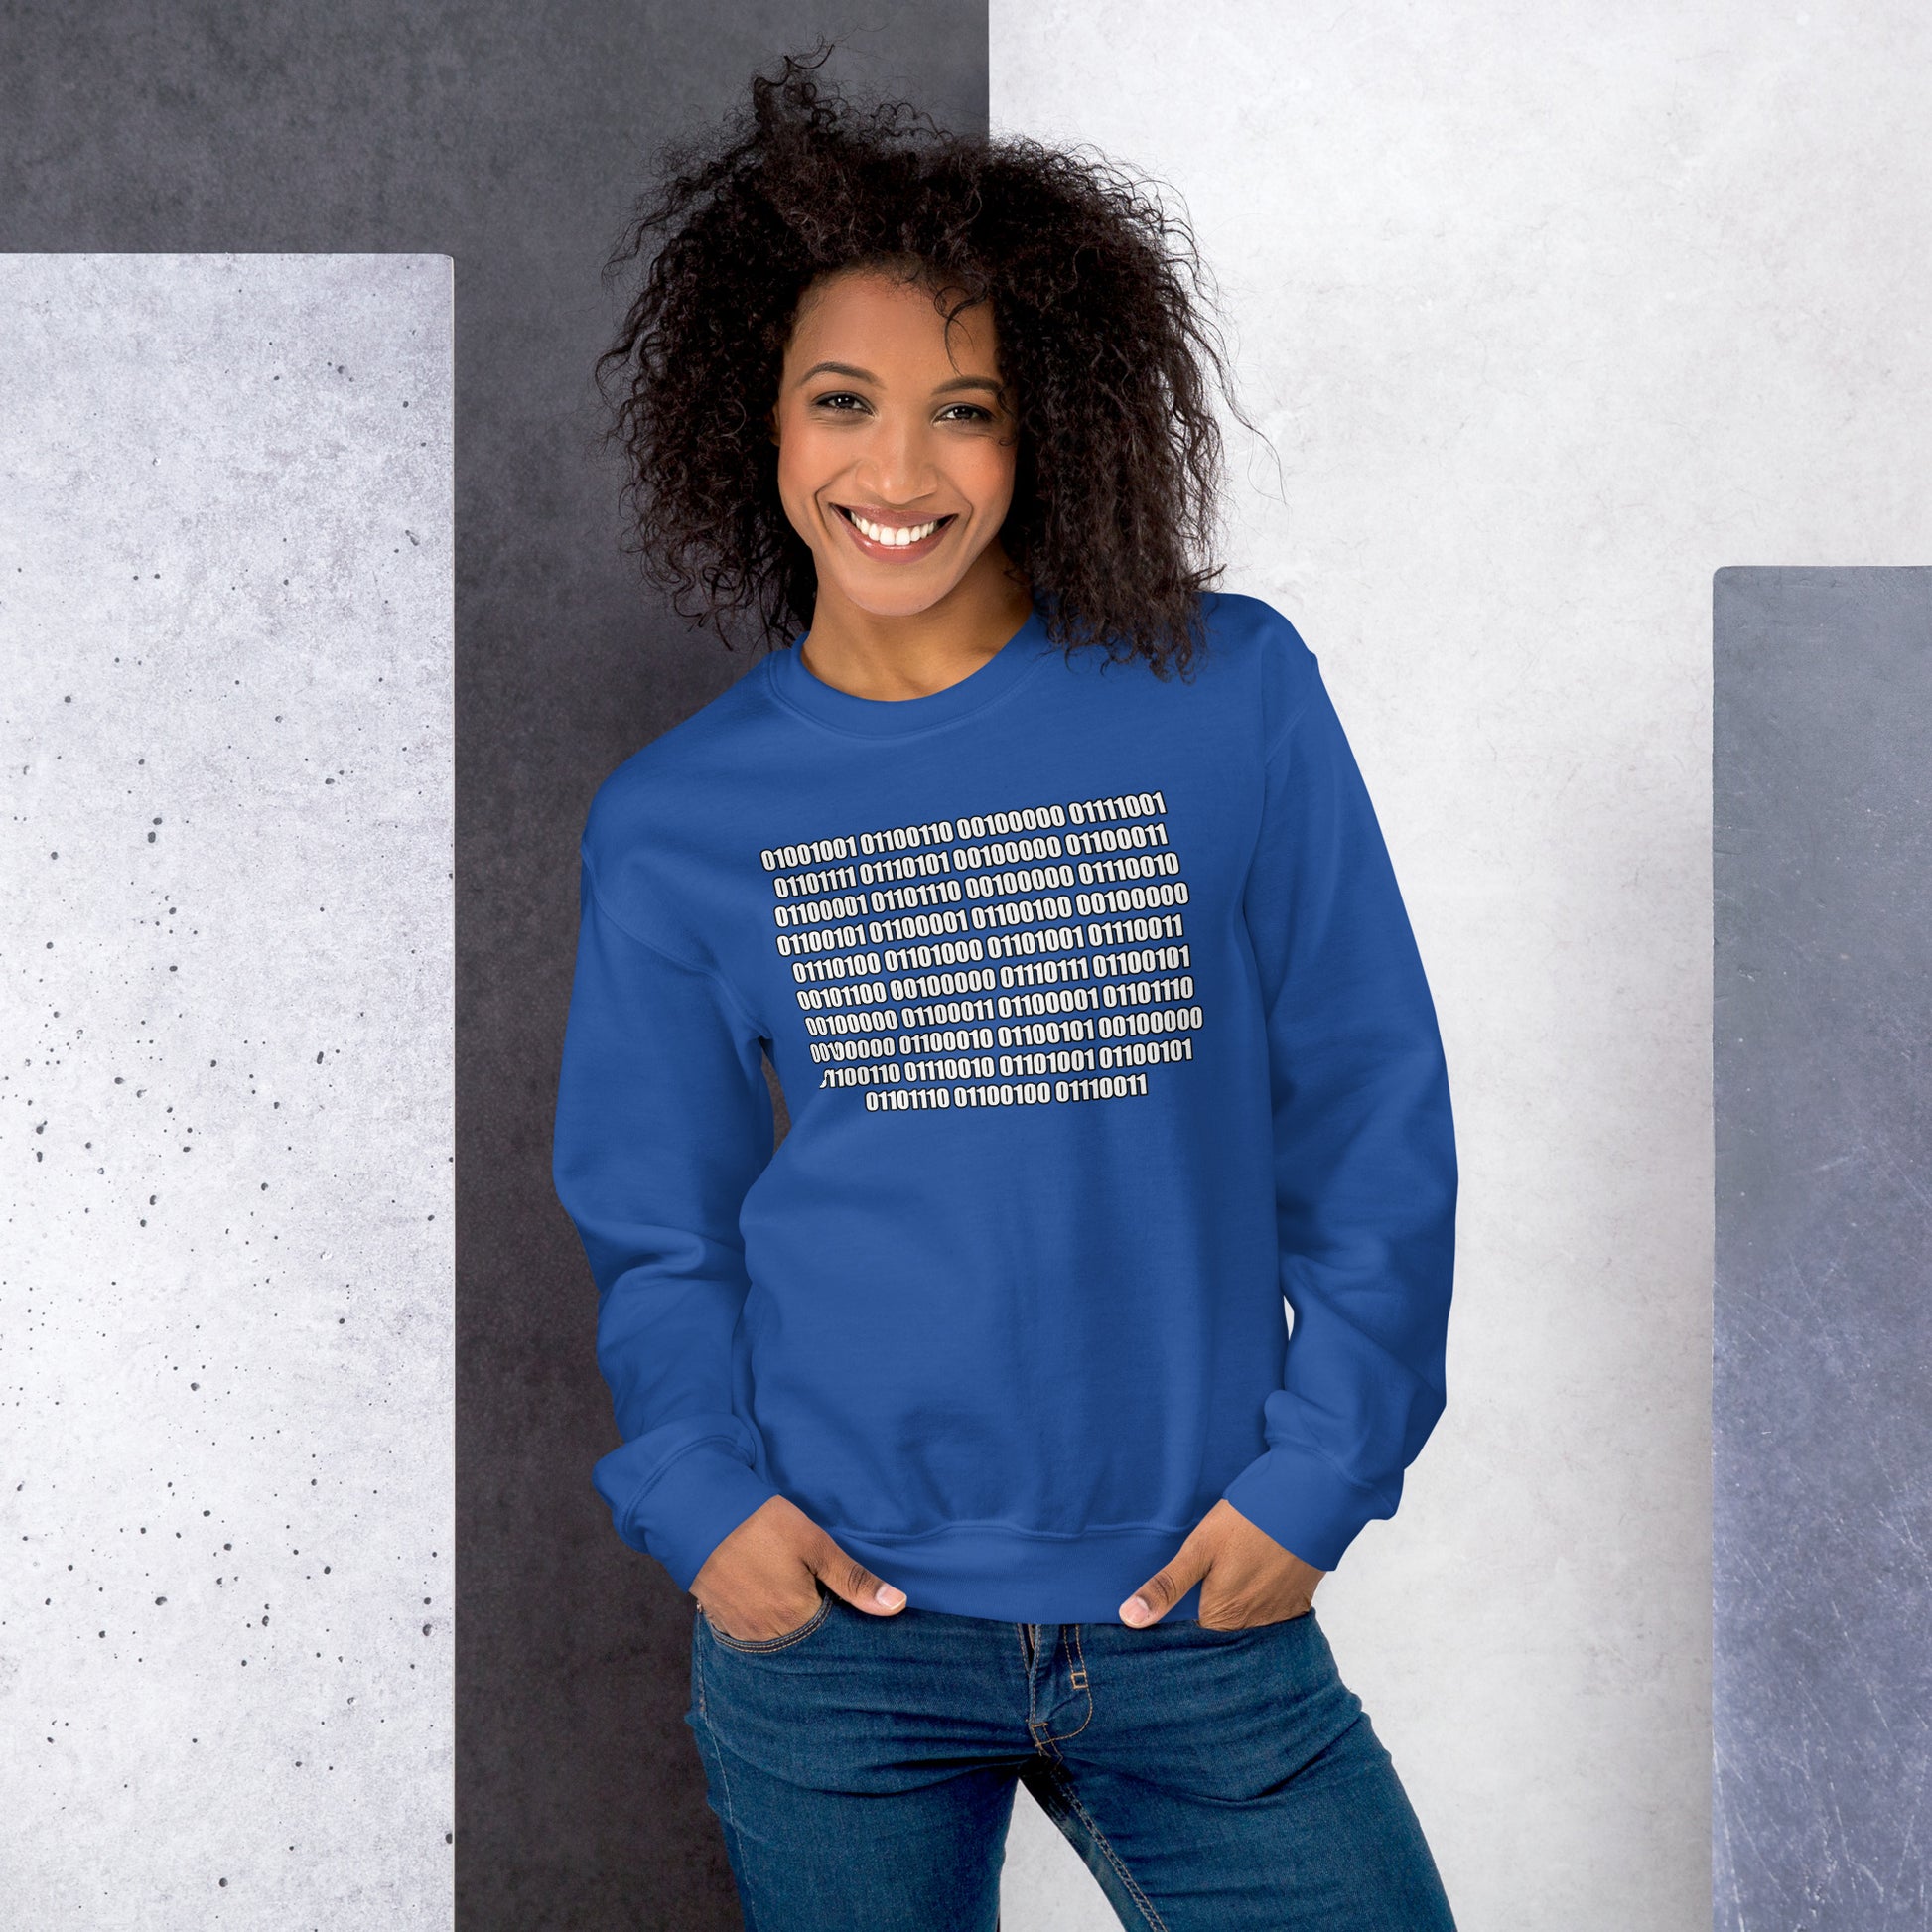 Women with royal blue sweatshirt with binaire text "If you can read this"